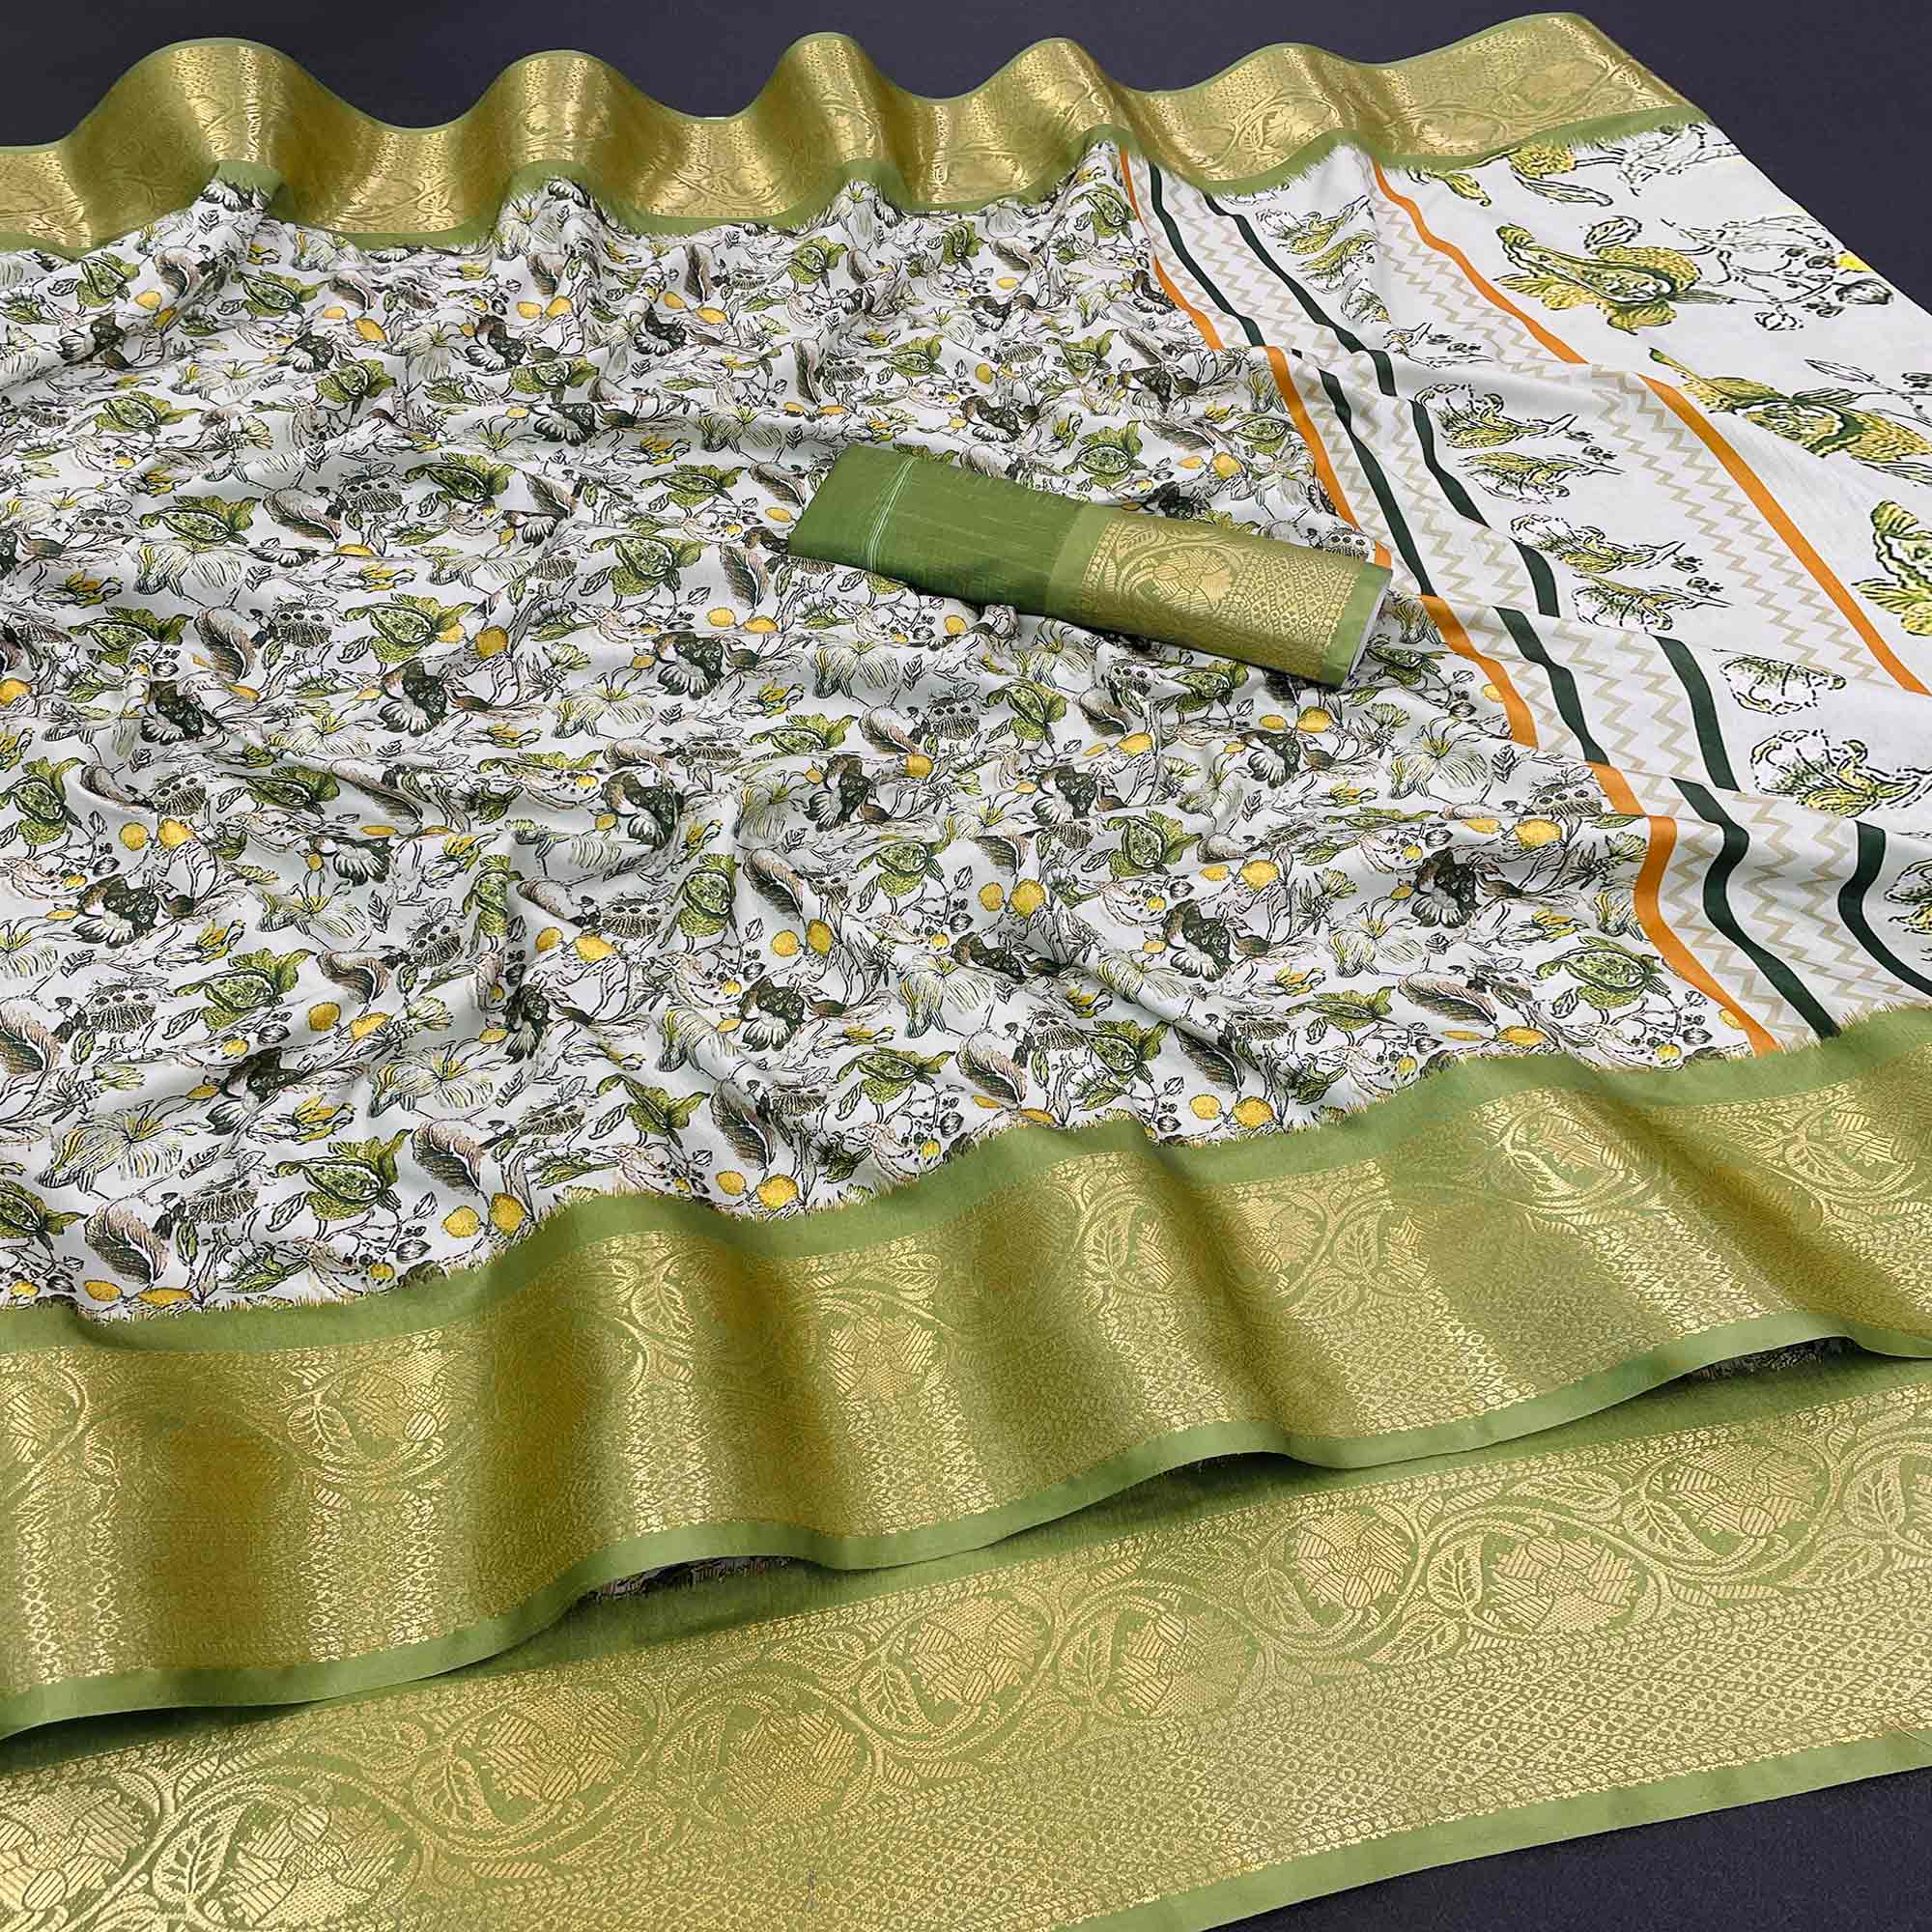 Off White & Green Floral Digital Printed With Woven Border Dola Silk Saree